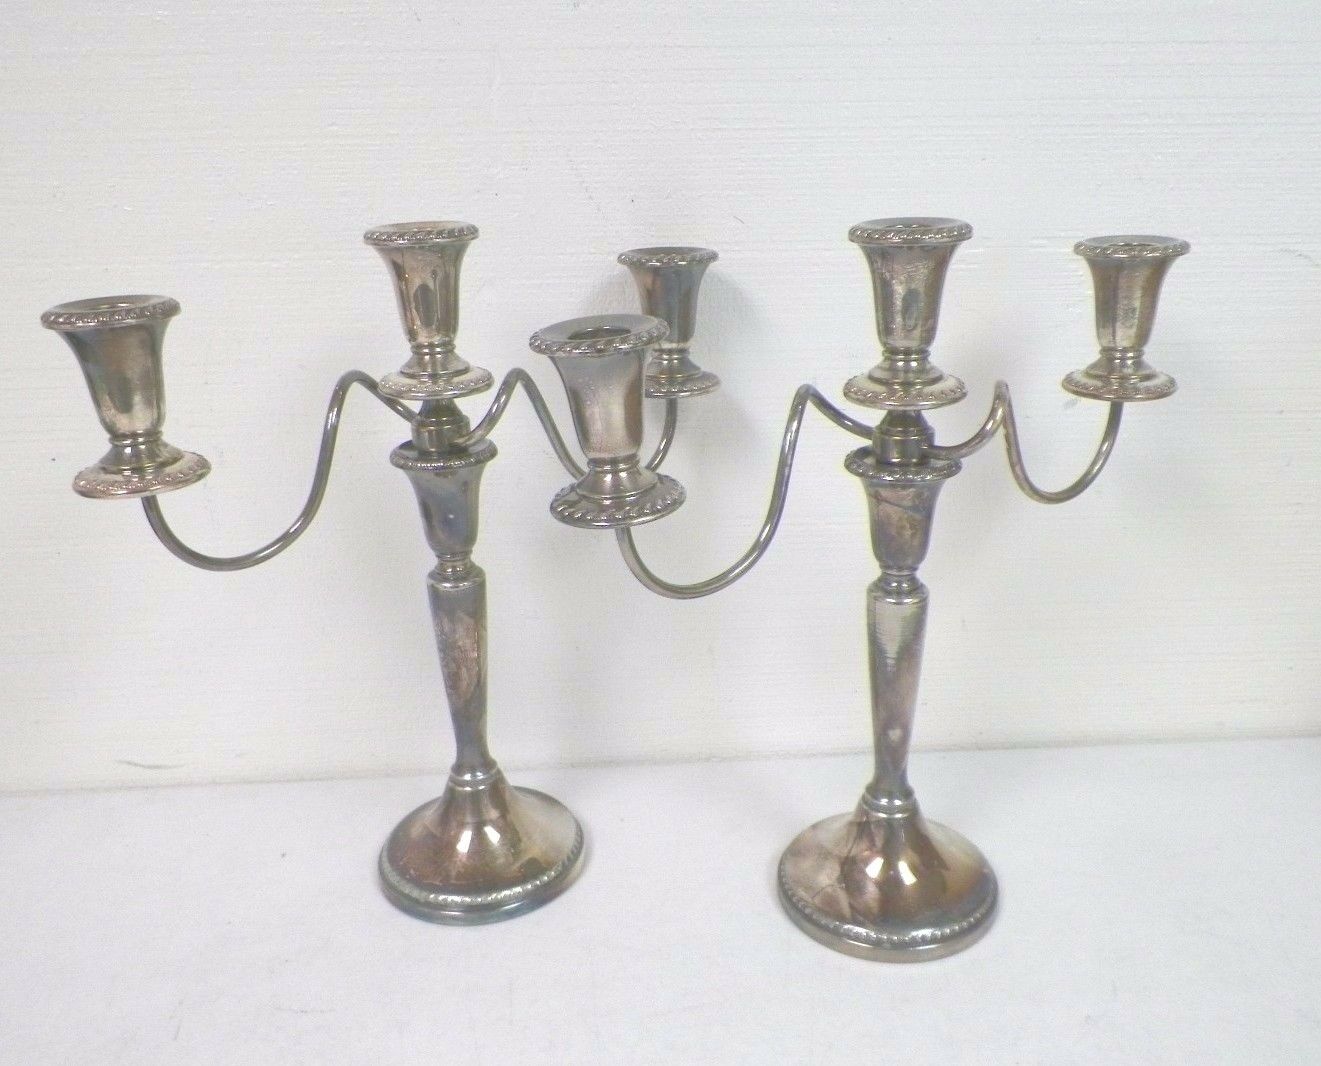 Pair Of Sheffield Silverplate Candlesticks With 3 Candle Insert Used 13 1/2"